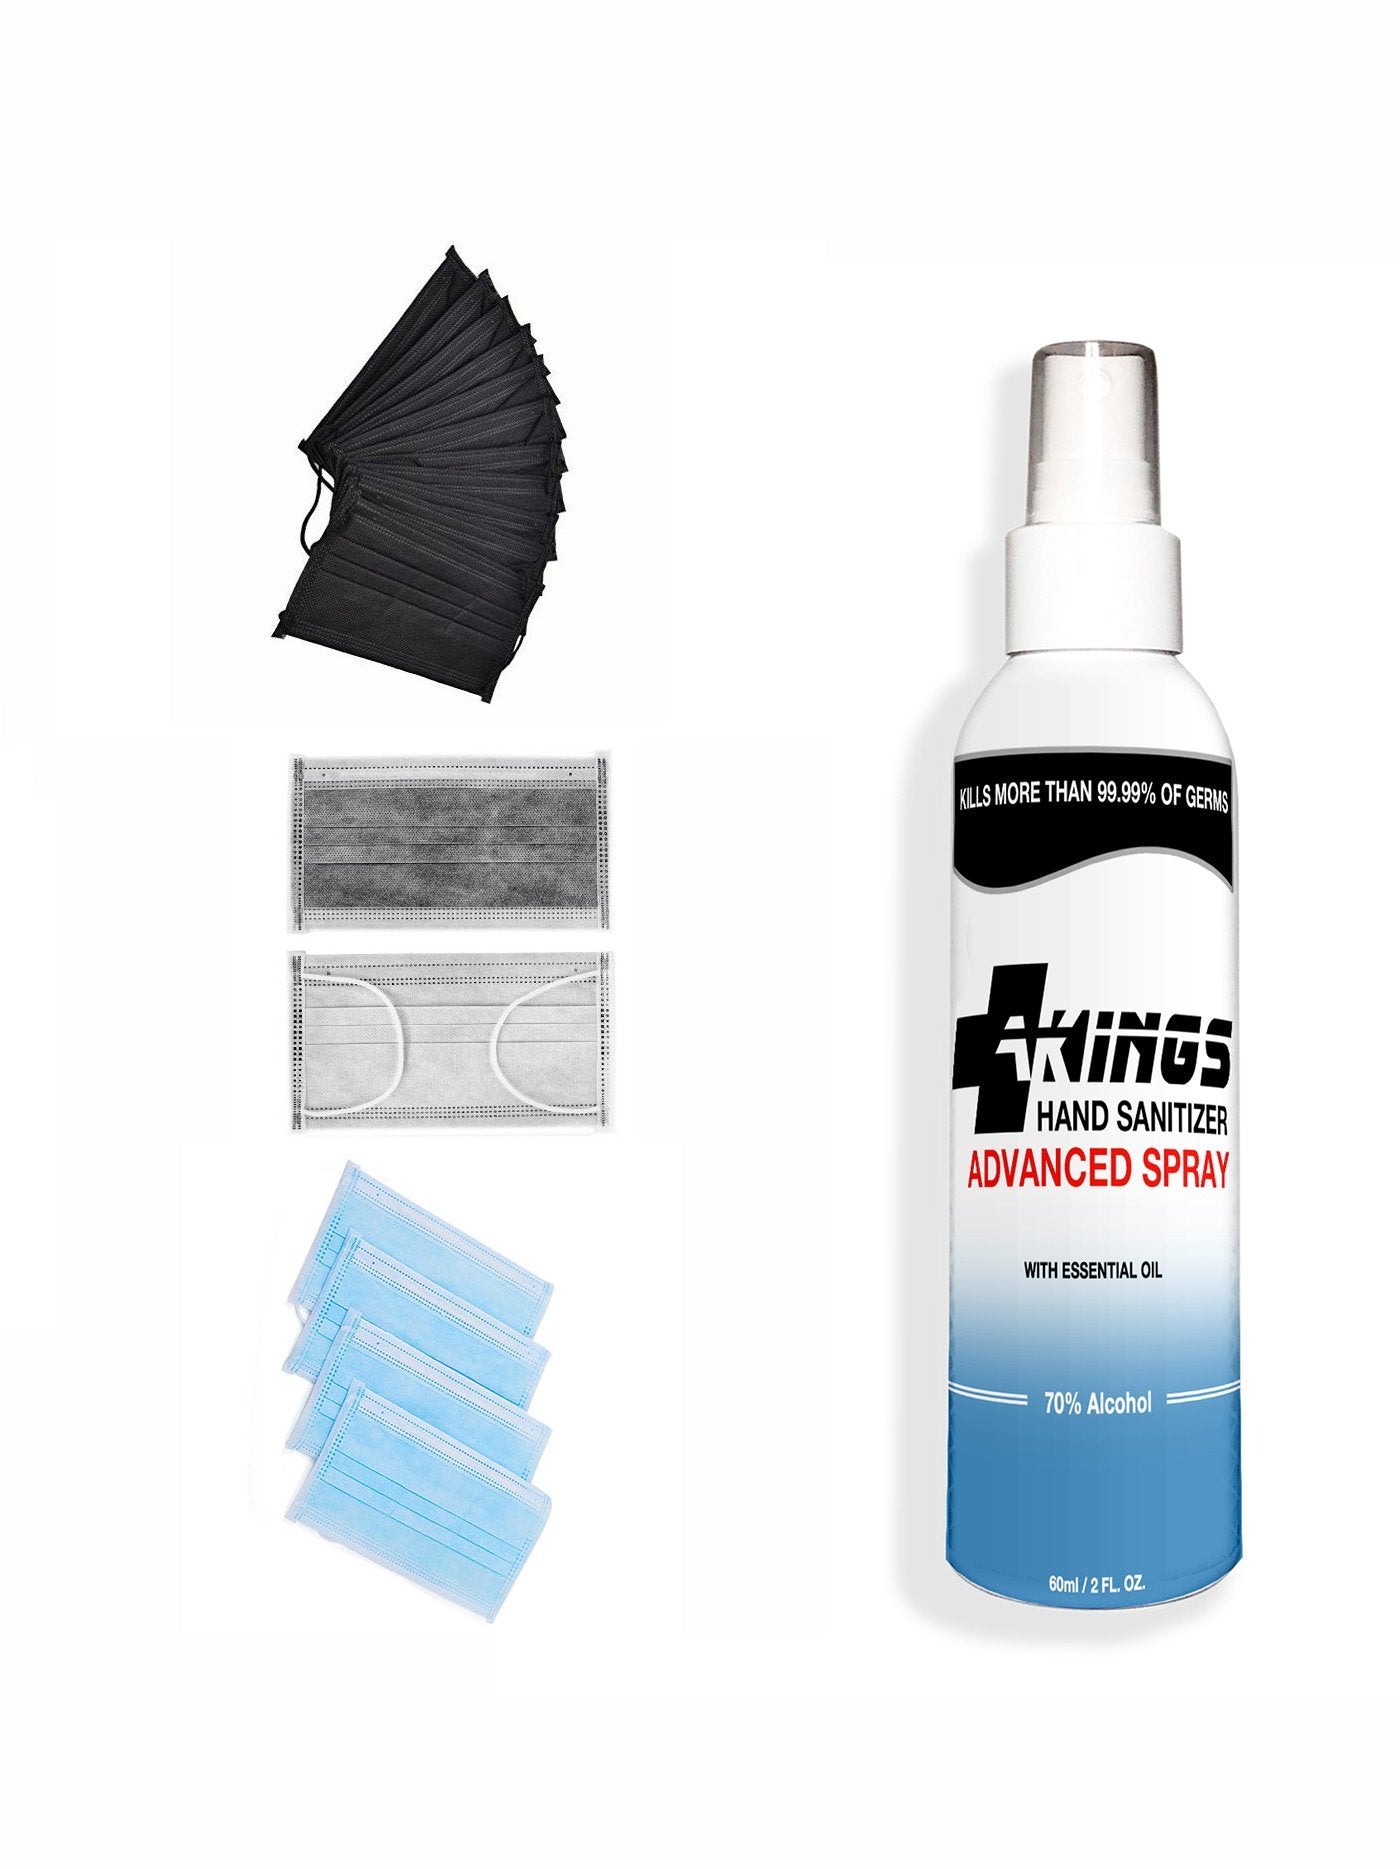 Disposable face masks in black, grey, and blue and AKINGS hand sanitizer bottle